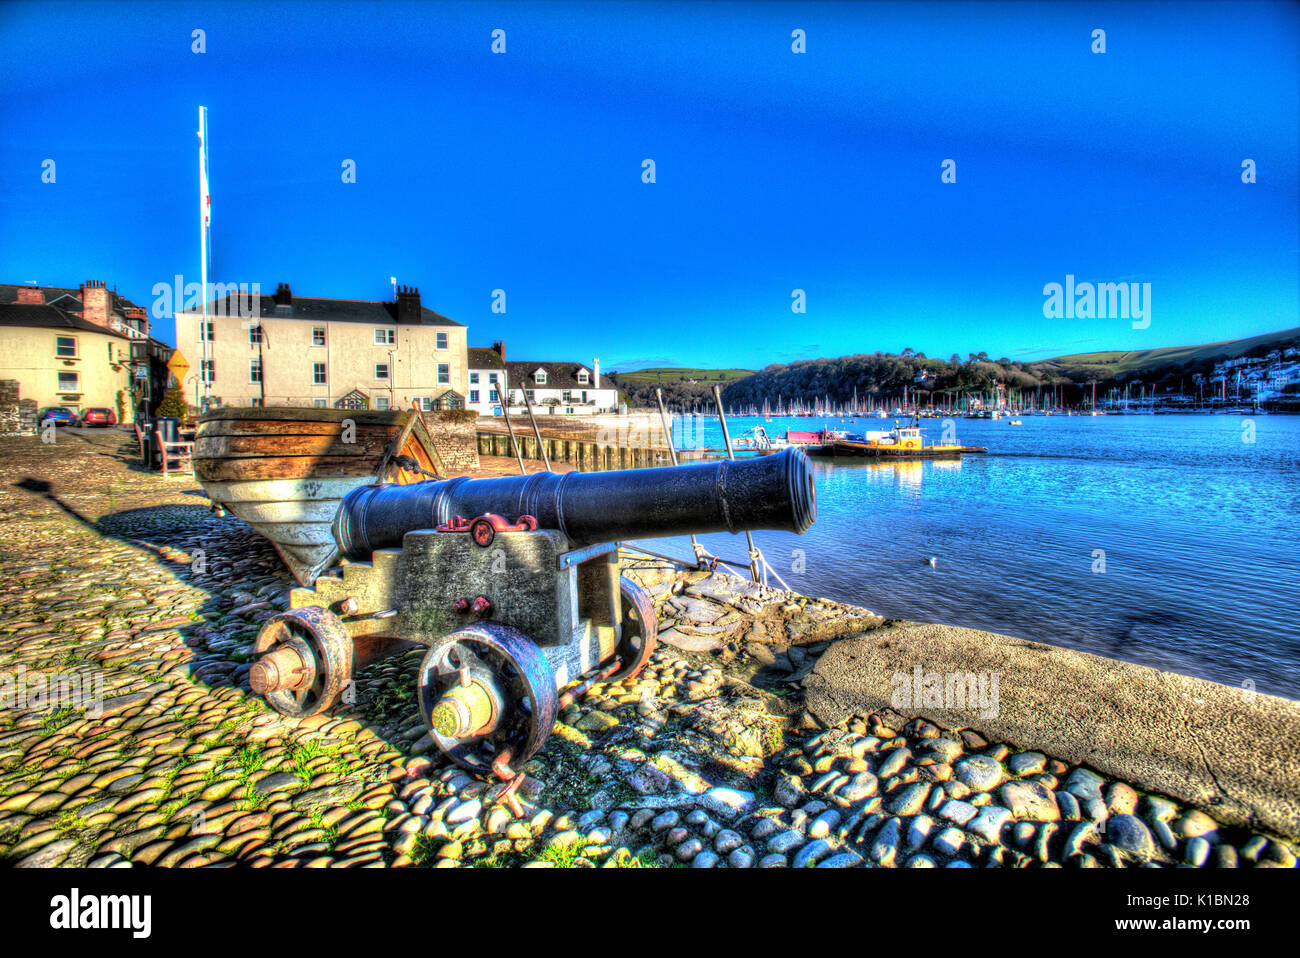 Town of Dartmouth, England. Picturesque view of Dartmouth’s River Dart viewed from Bayard’s Cove. Stock Photo